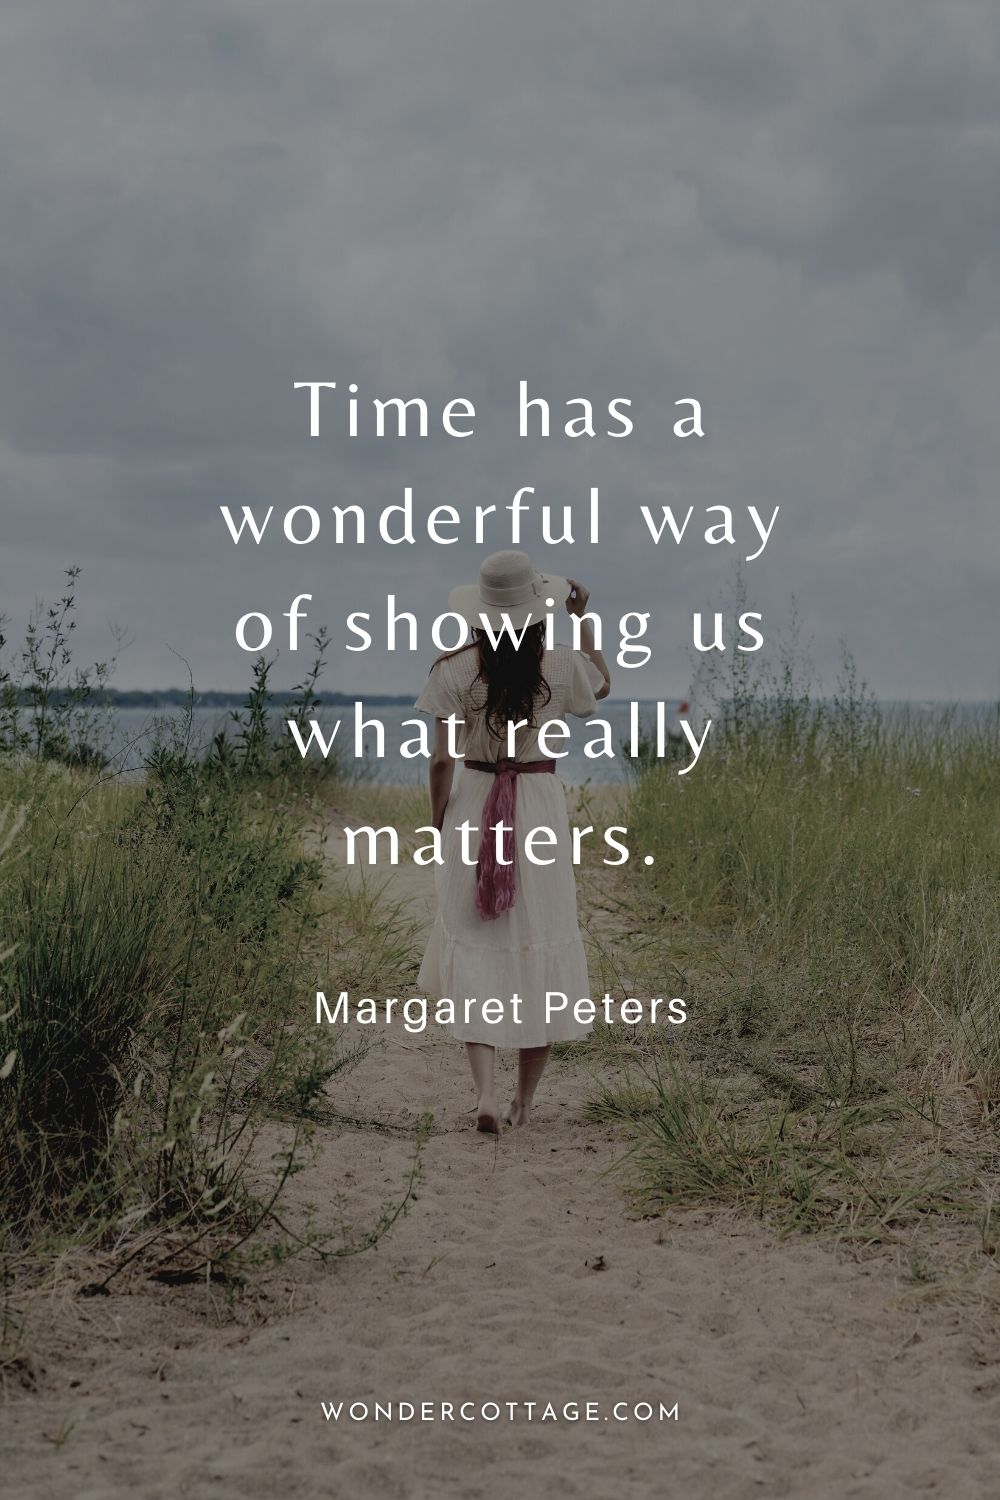 Time has a wonderful way of showing us what really matters. Margaret Peters